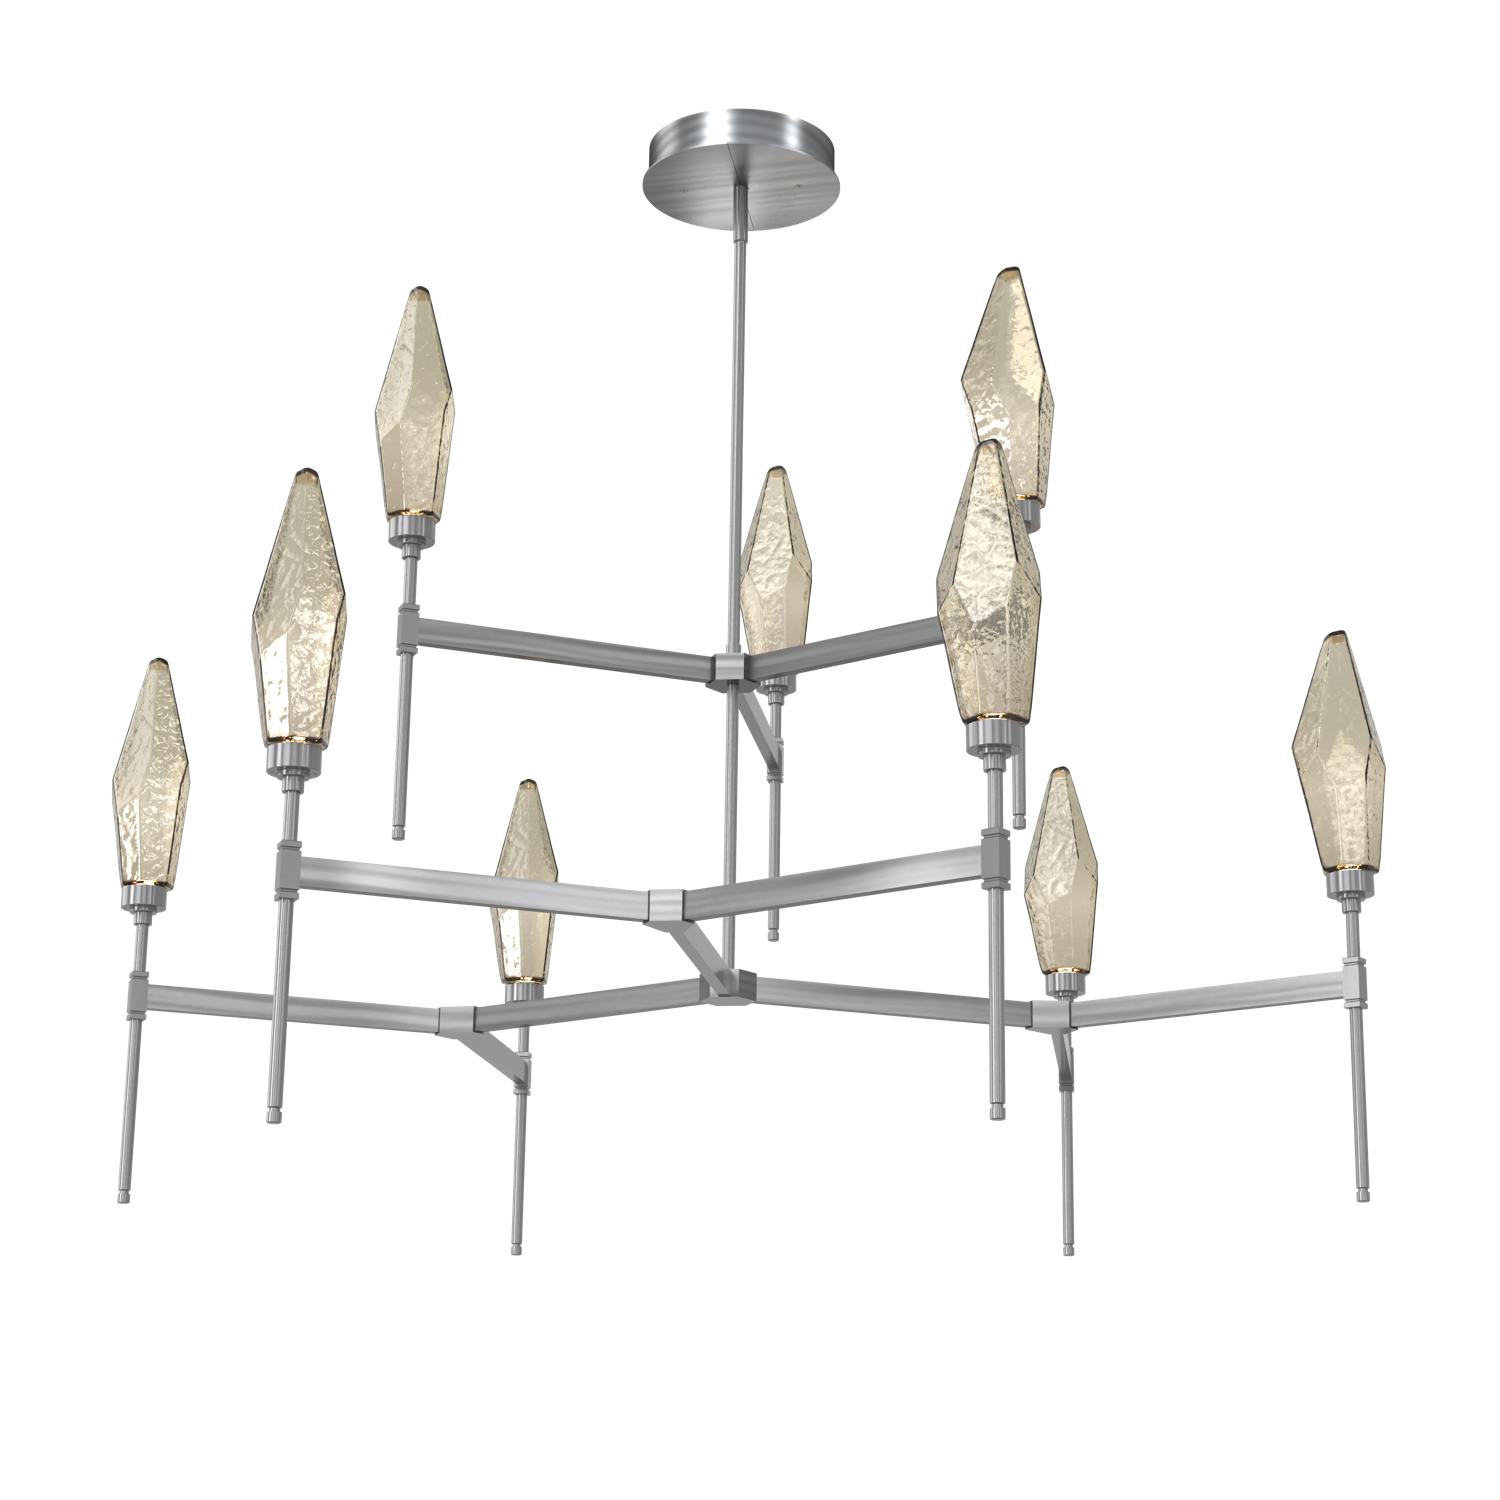 CHB0050-54-GM-CB-Hammerton-Studio-Rock-Crystal-54-inch-round-two-tier-belvedere-chandelier-with-gunmetal-finish-and-chilled-bronze-blown-glass-shades-and-LED-lamping